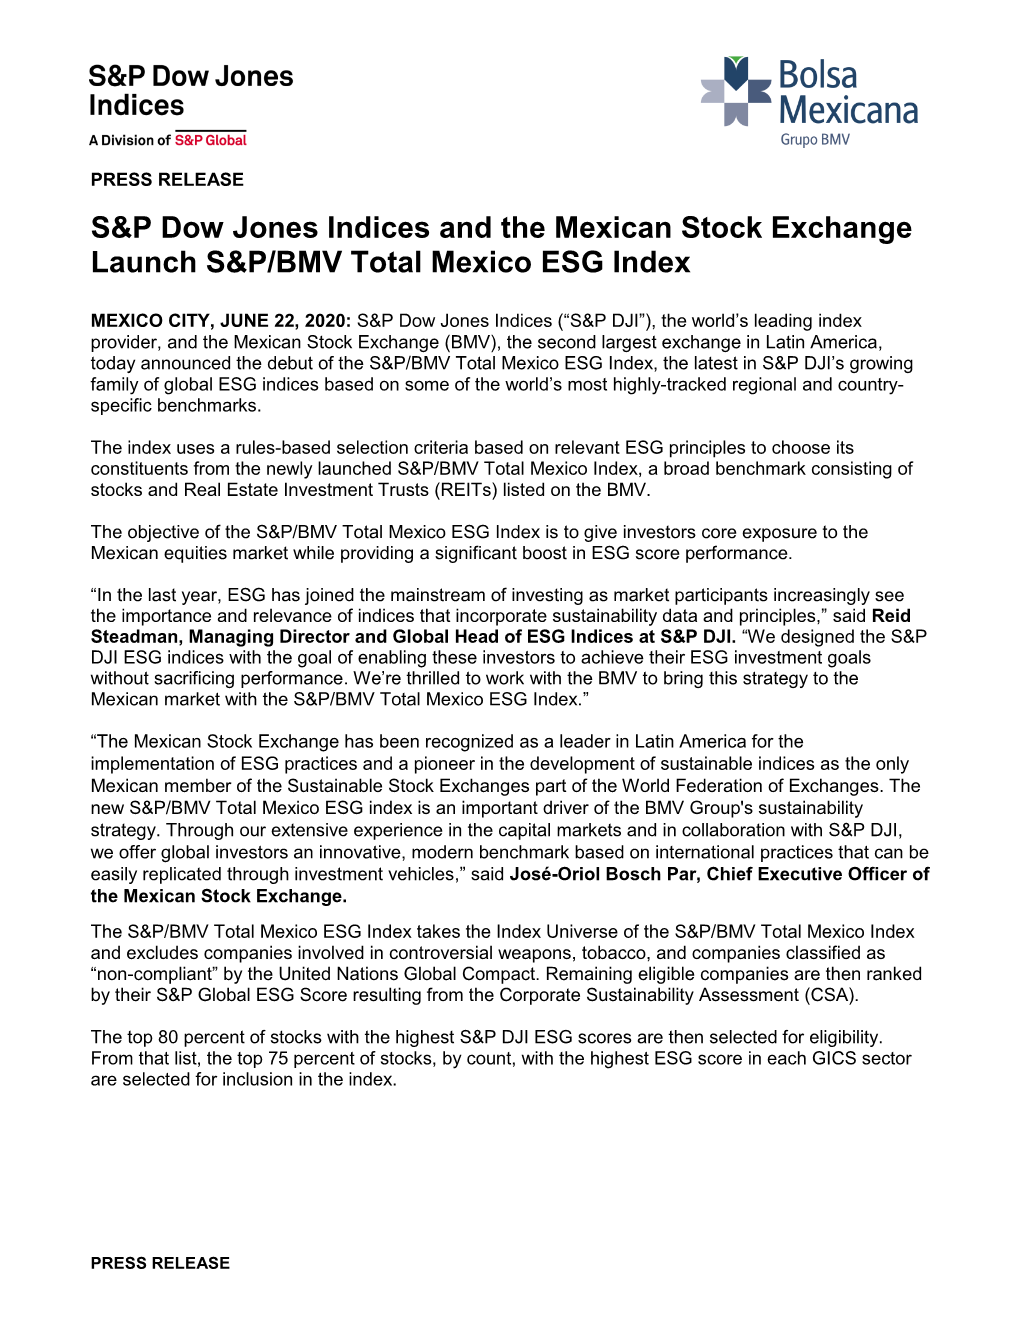 S&P Dow Jones Indices and the Mexican Stock Exchange Launch